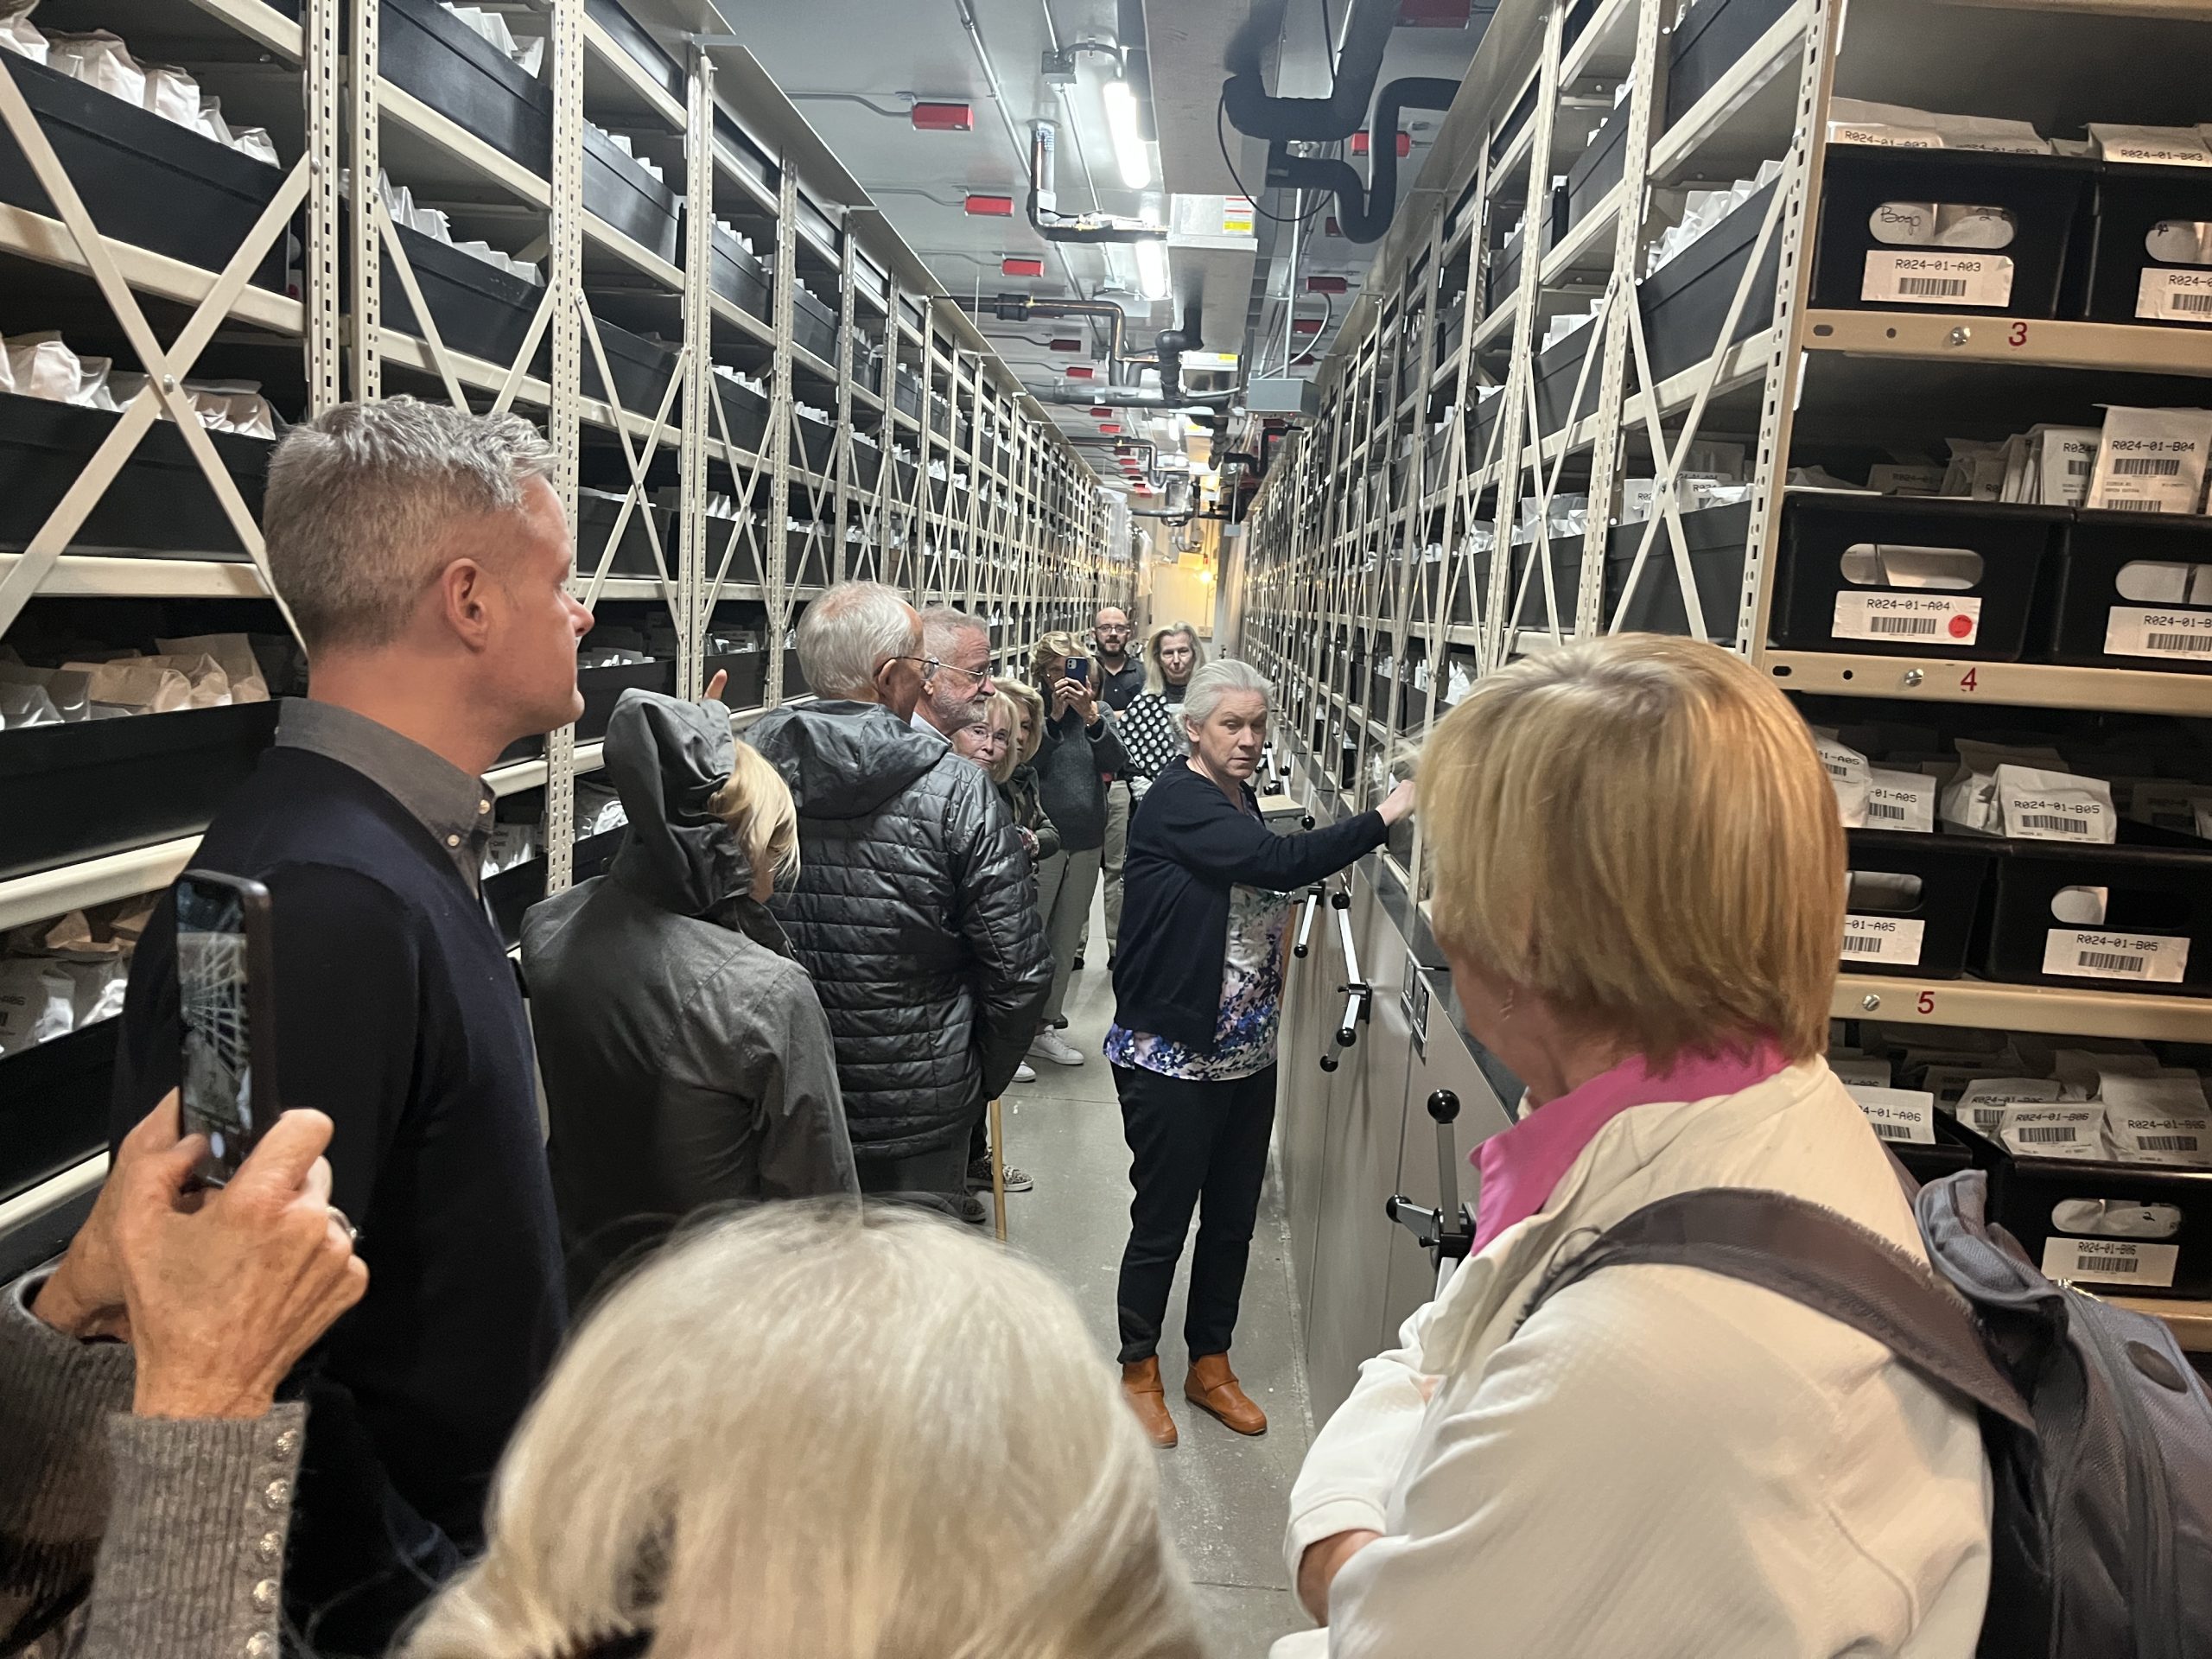 Chris Walters shows CPC Board of Trustees the walk in freezer where USDA seeds are stored. Photo by Katie Heineman.